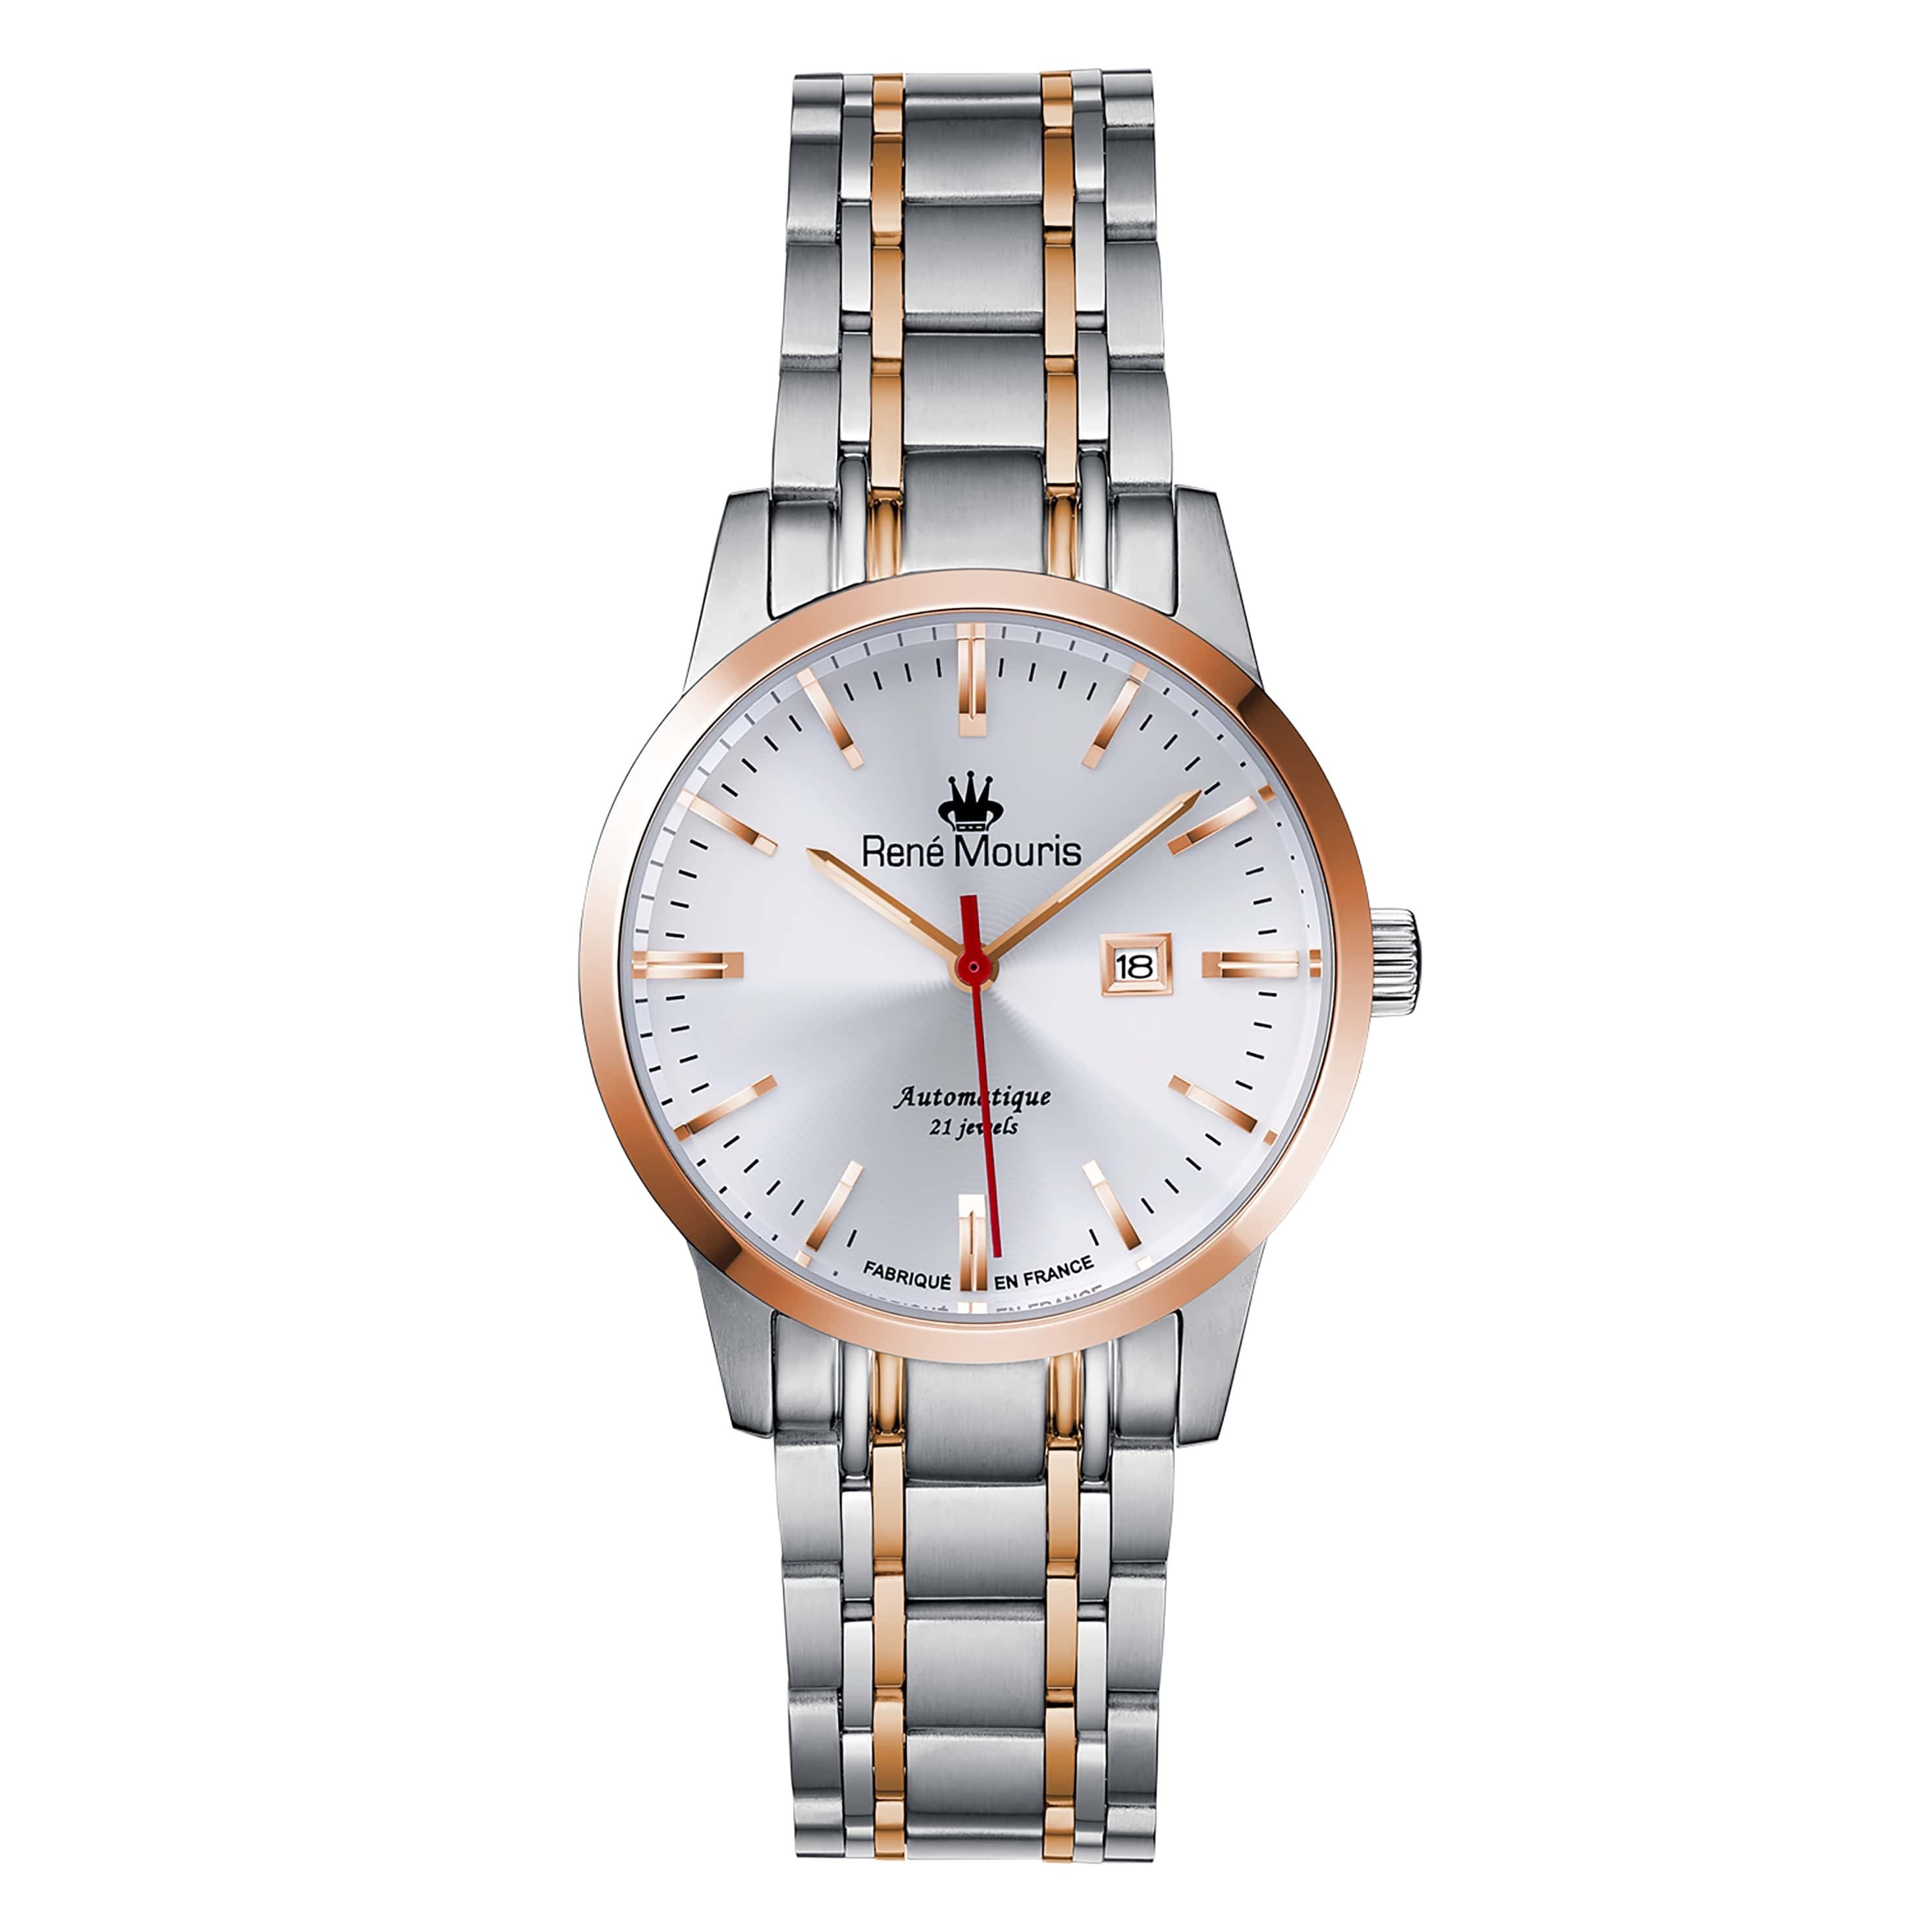 RENE MOURIS Noblesse Series Automatic Watch Women